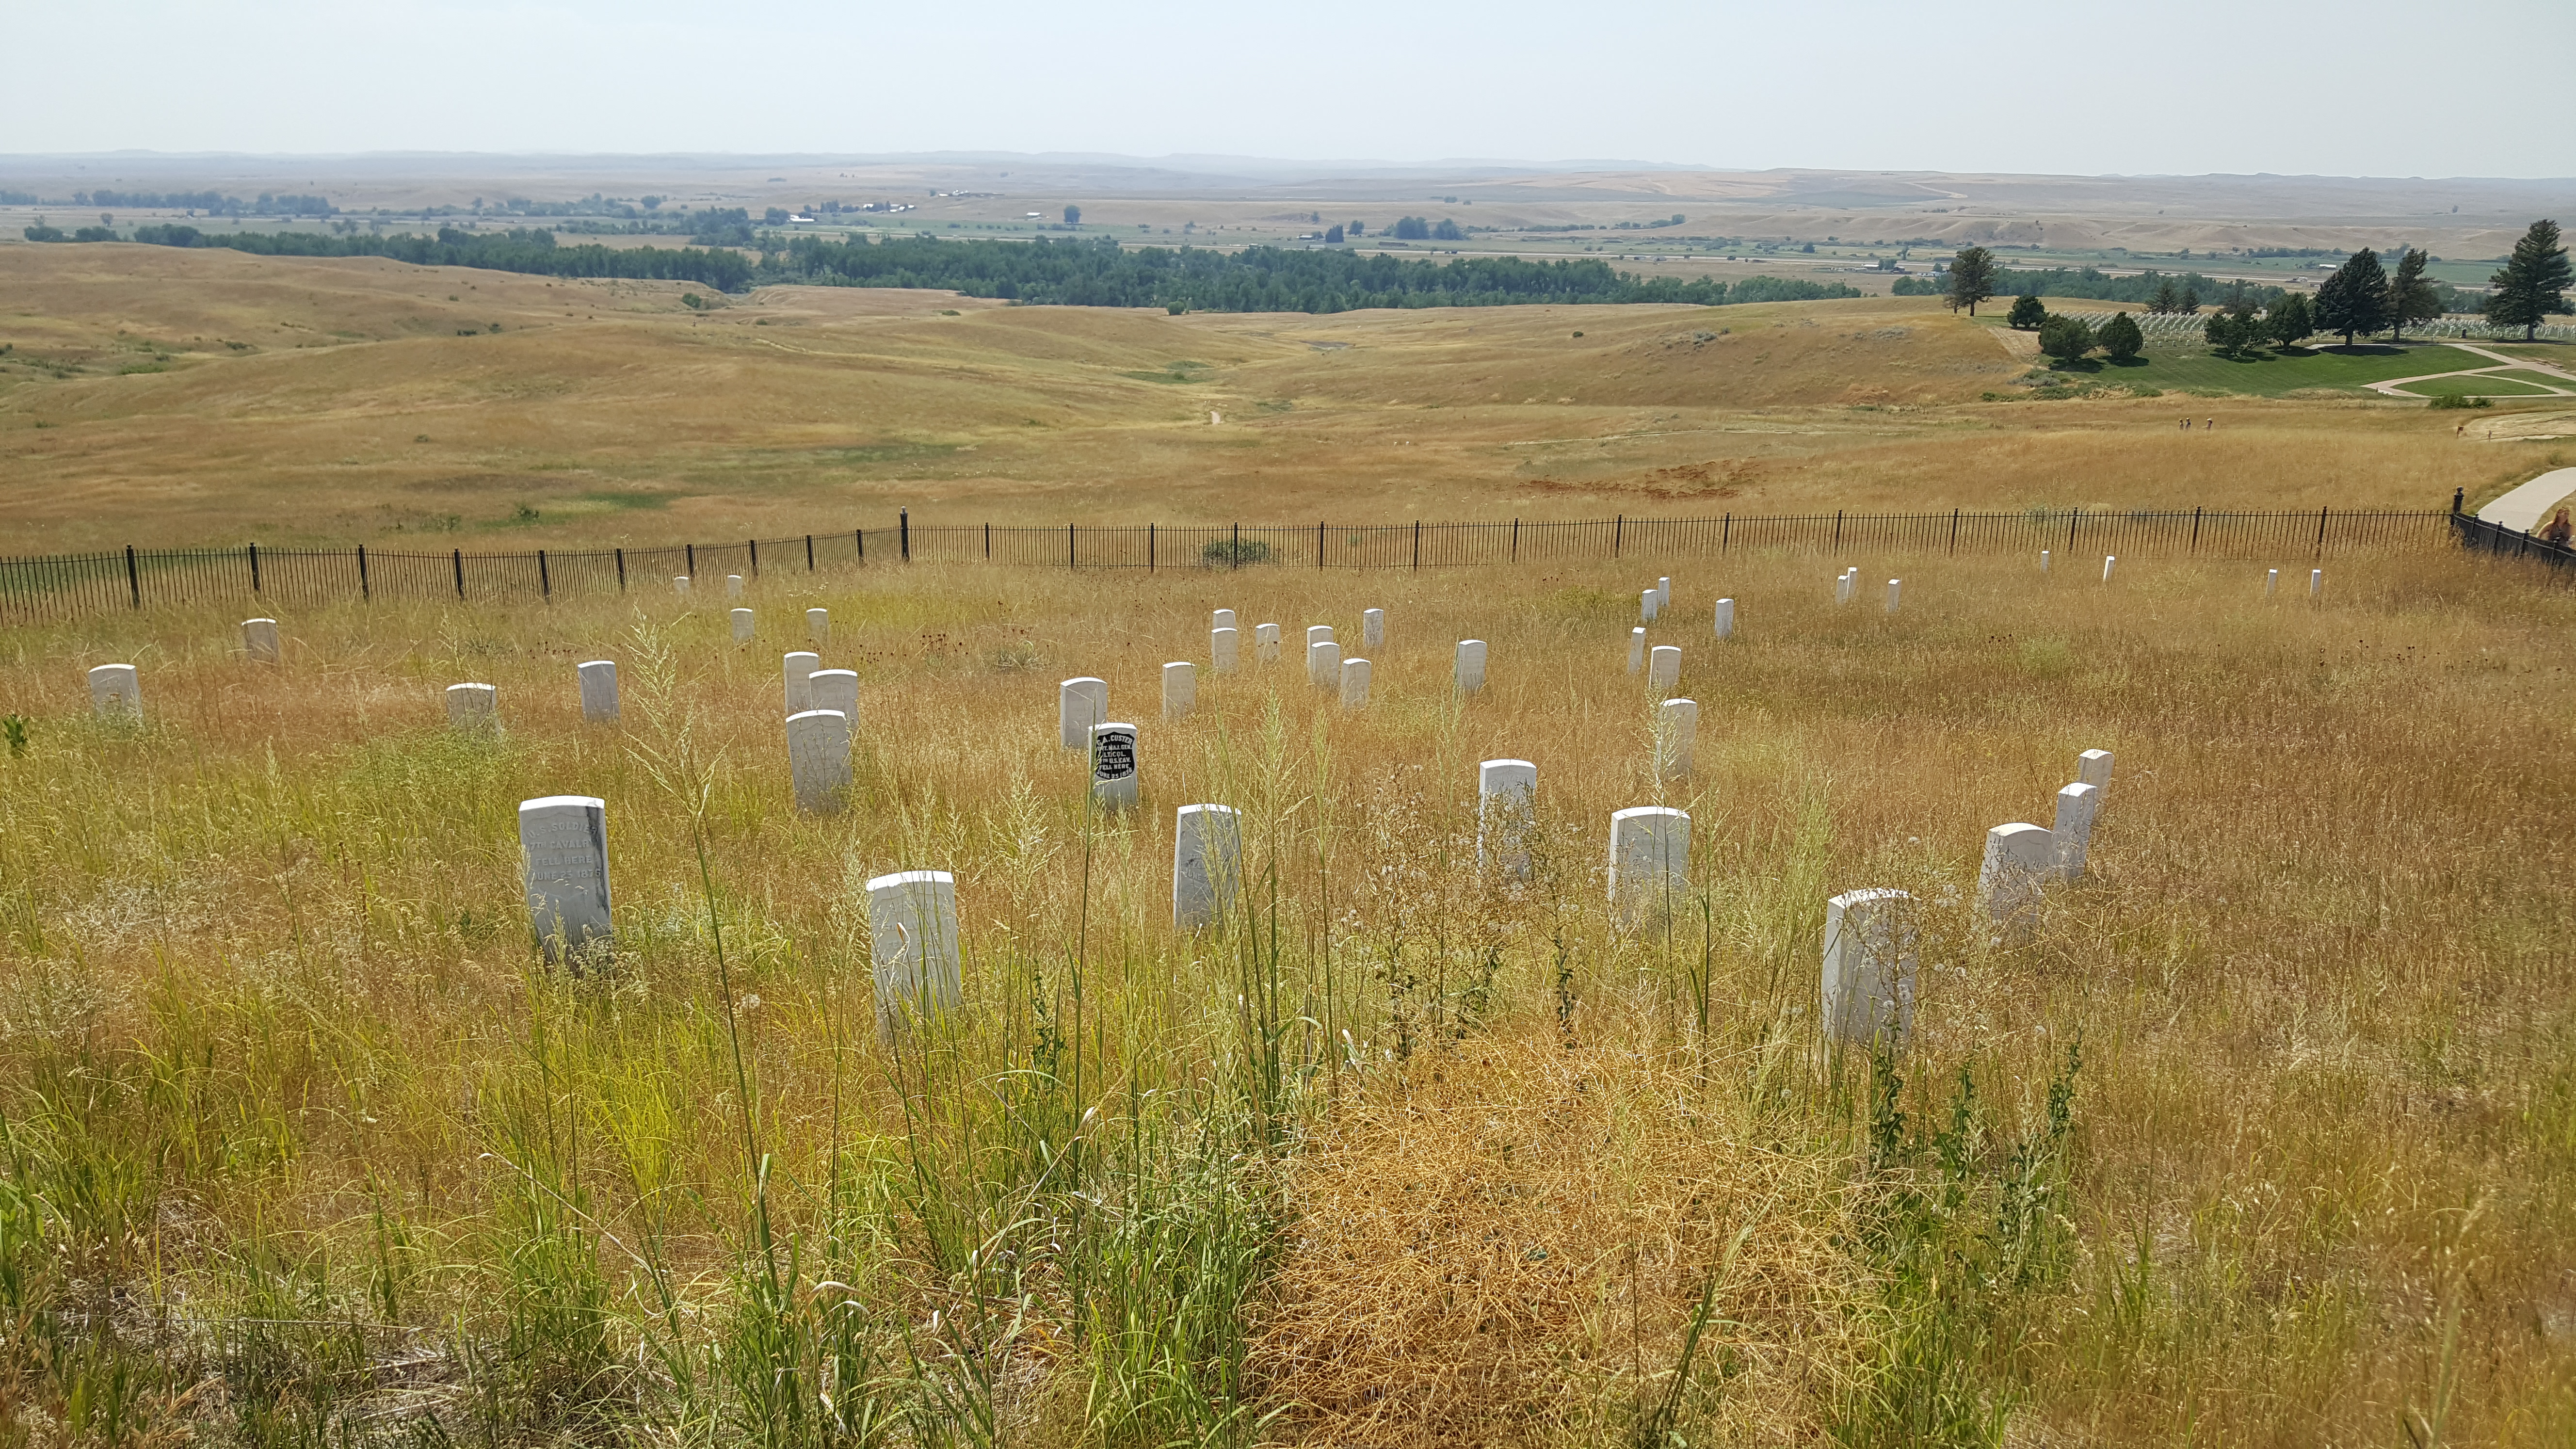 Custer's Last Stand at Little Bighorn, 2017